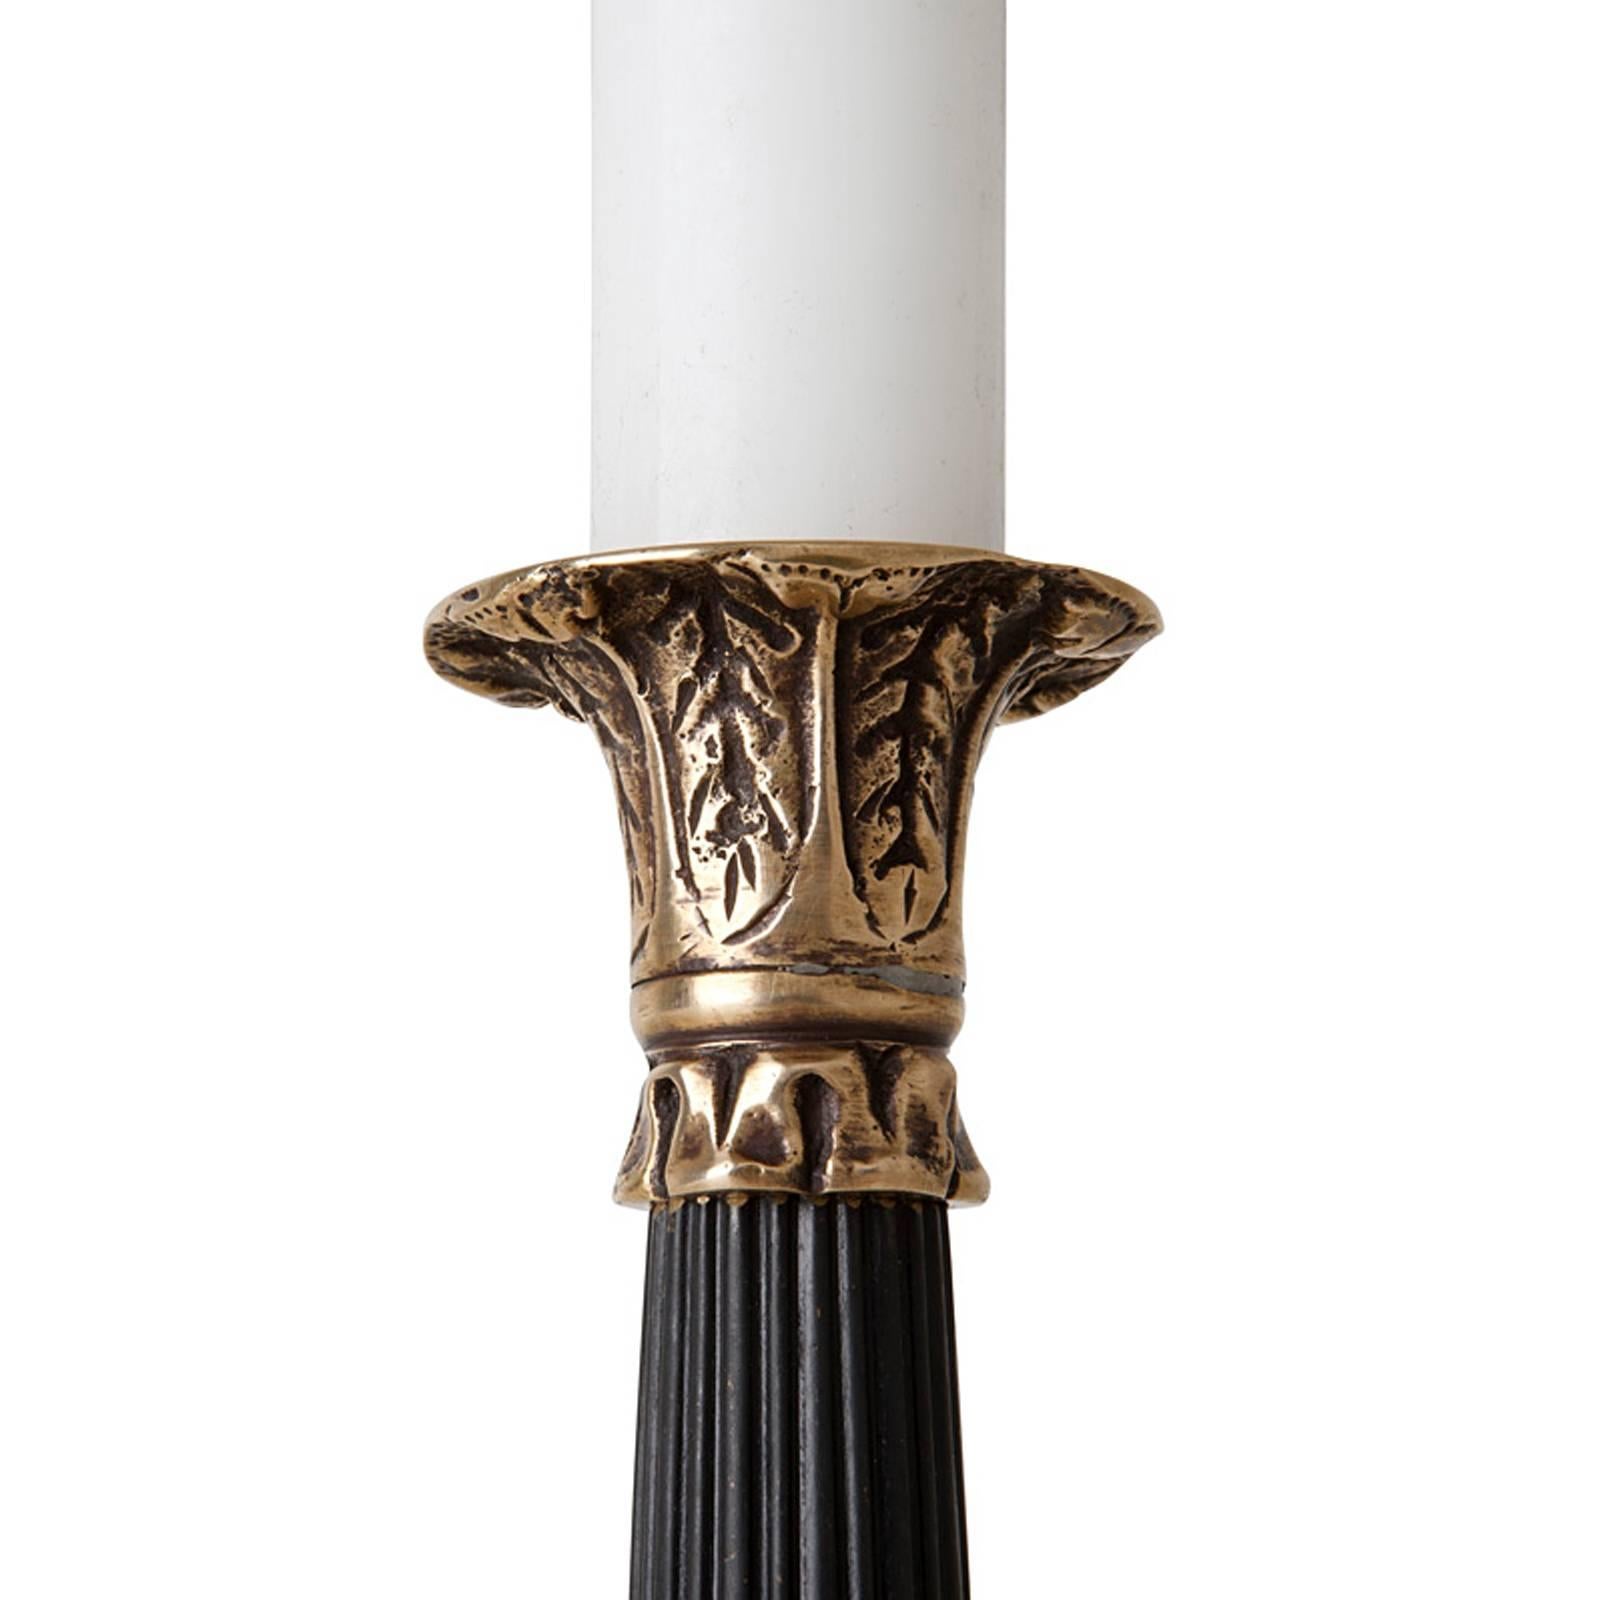 Indian Chevalier Candle Holder in Brass Finish or Nickel Finish